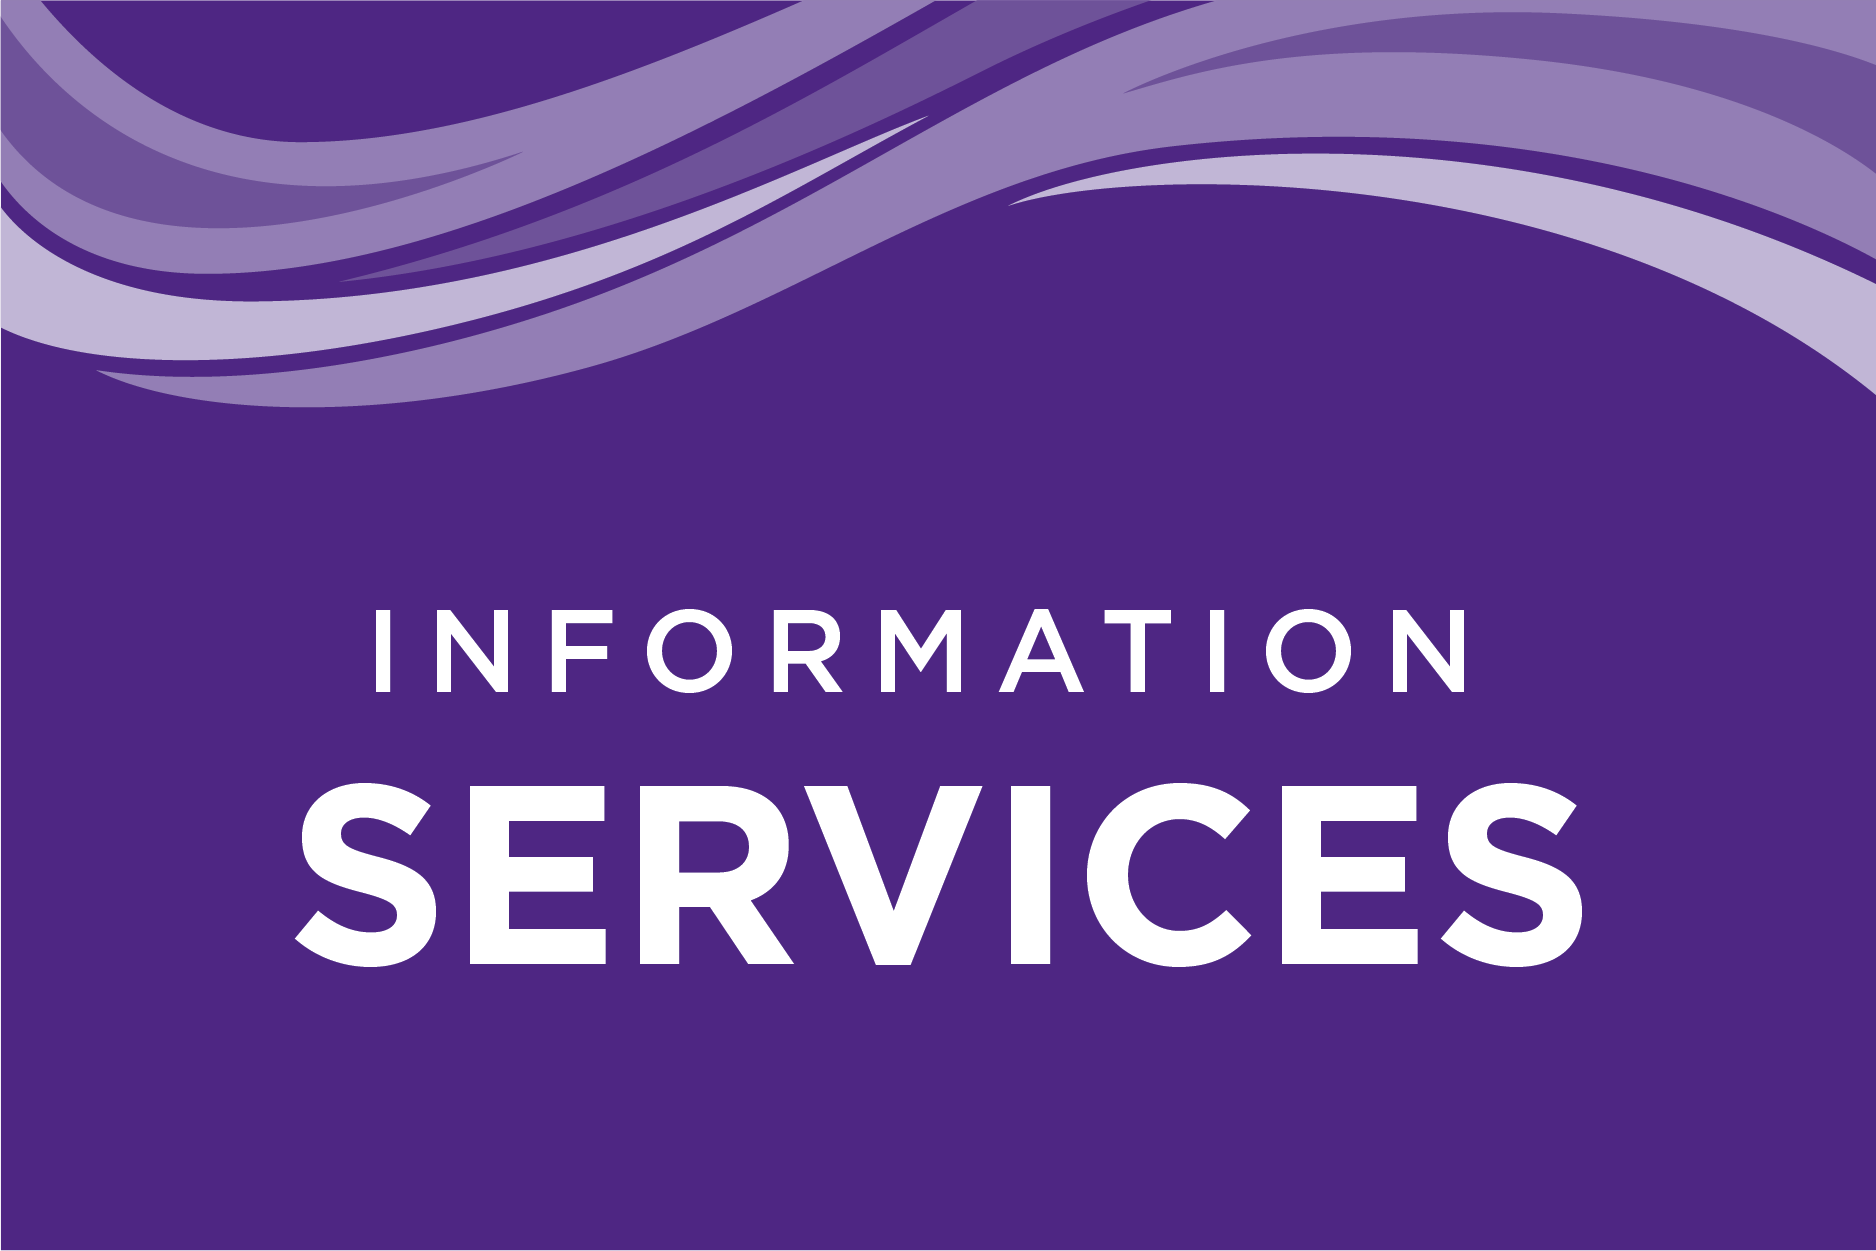 UC Information Services at UW-Whitewater